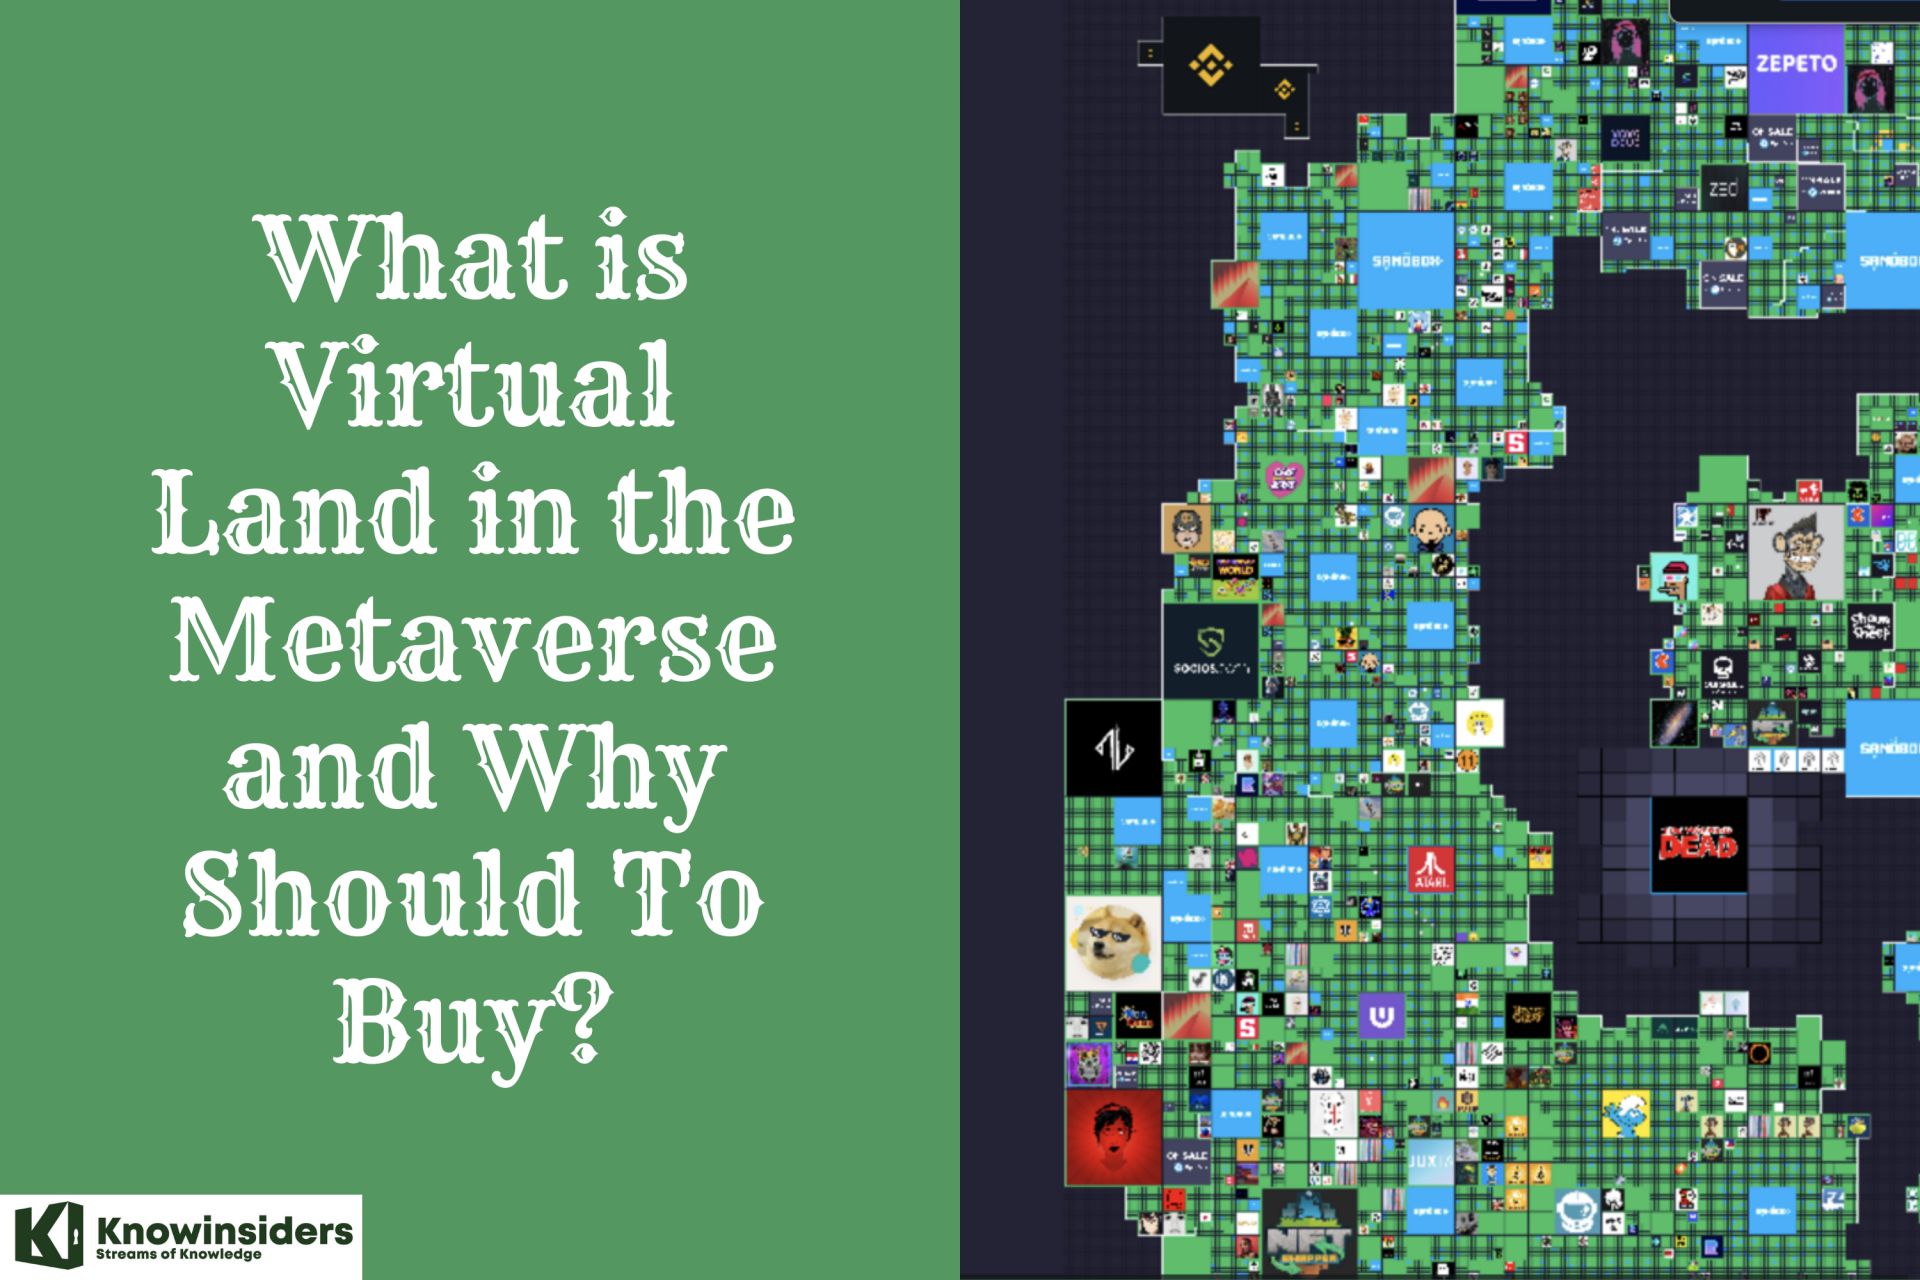 Why Should To Buy Virtual Land in the Metaverse